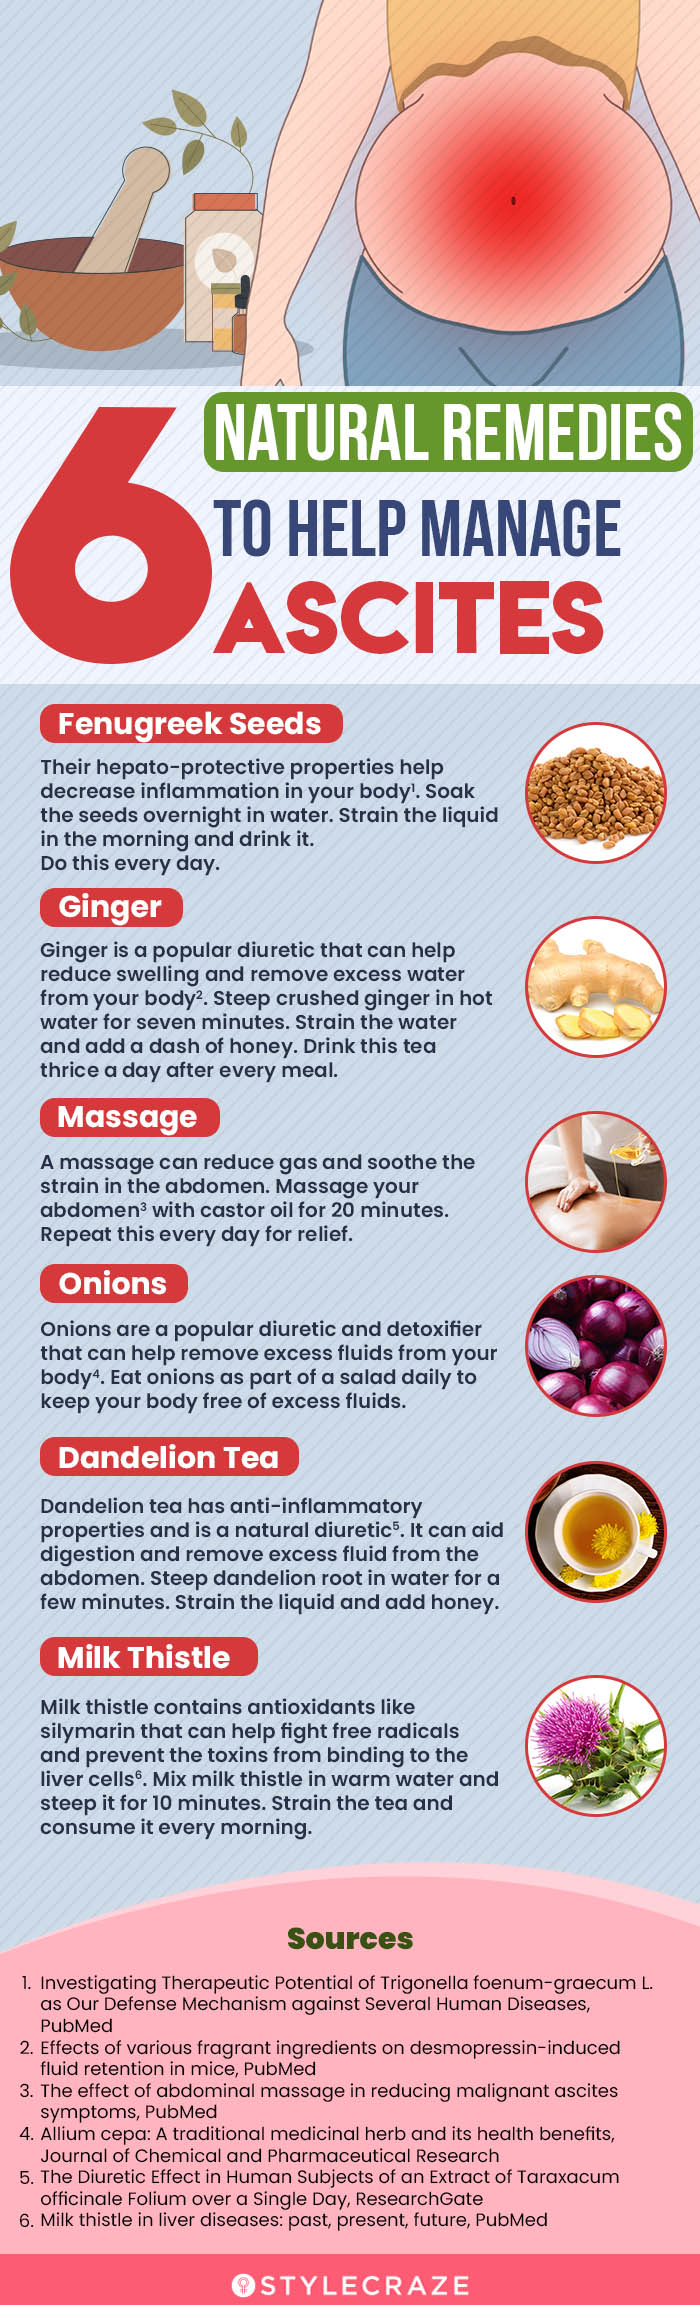 6 natural remedies to help manage ascites [infographic]